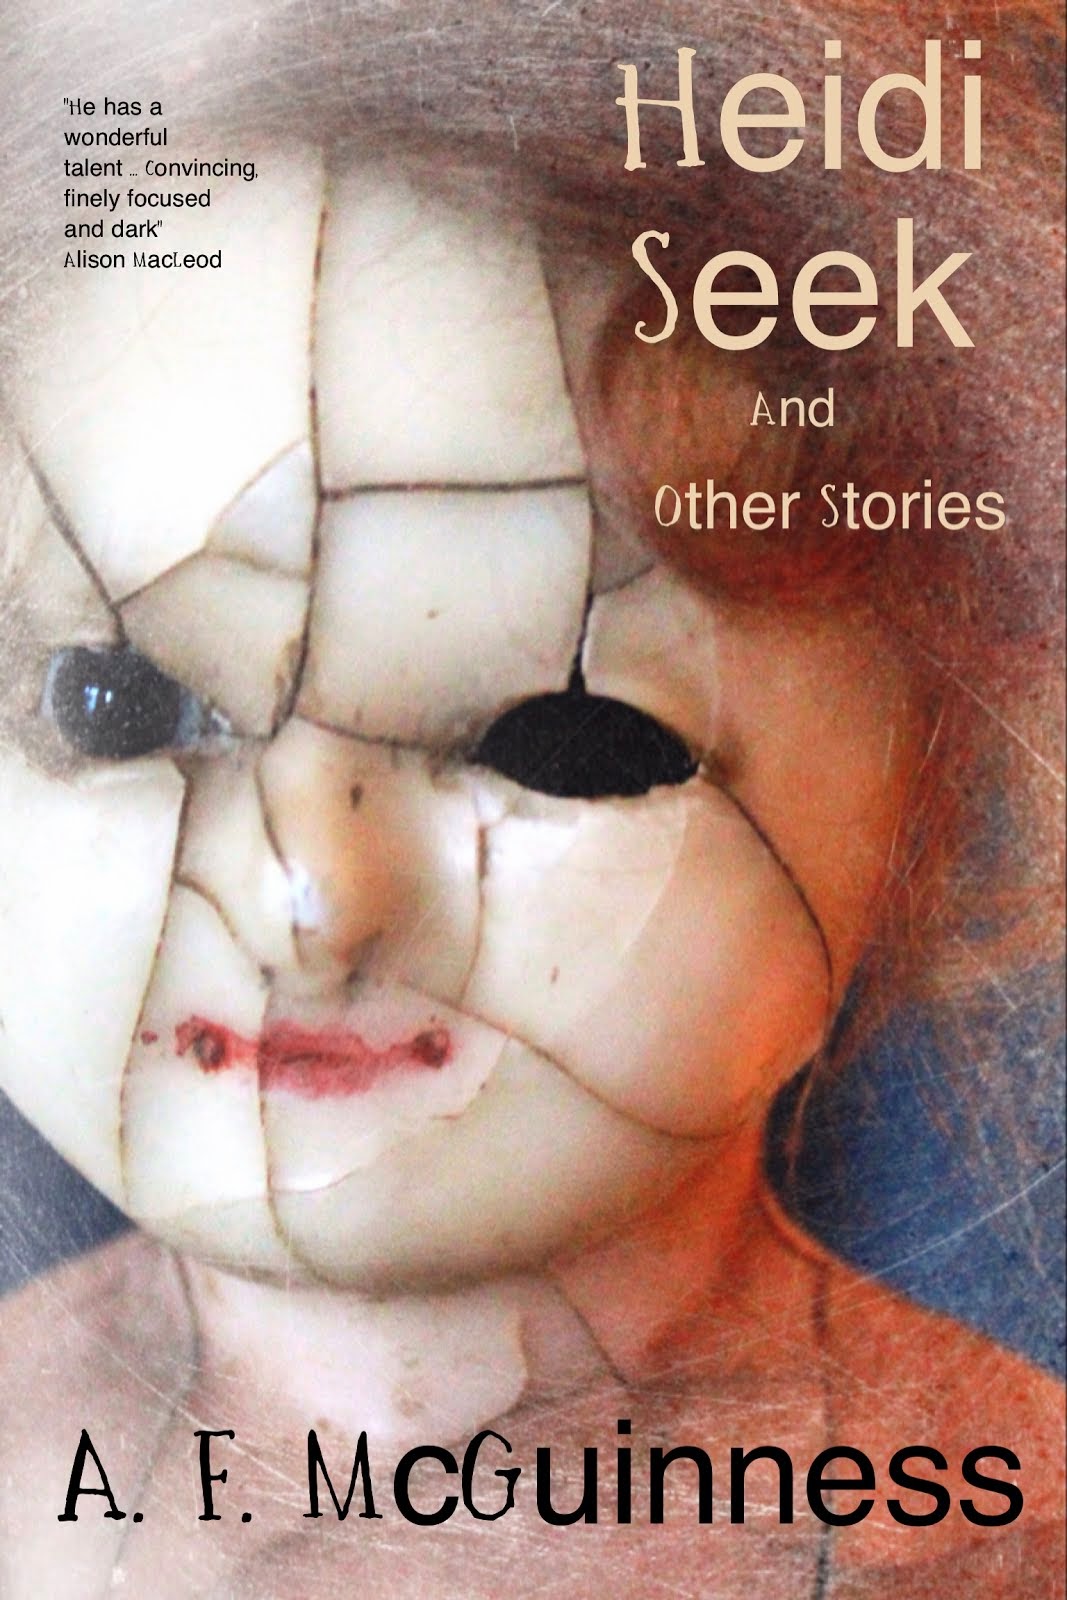 New short story collection